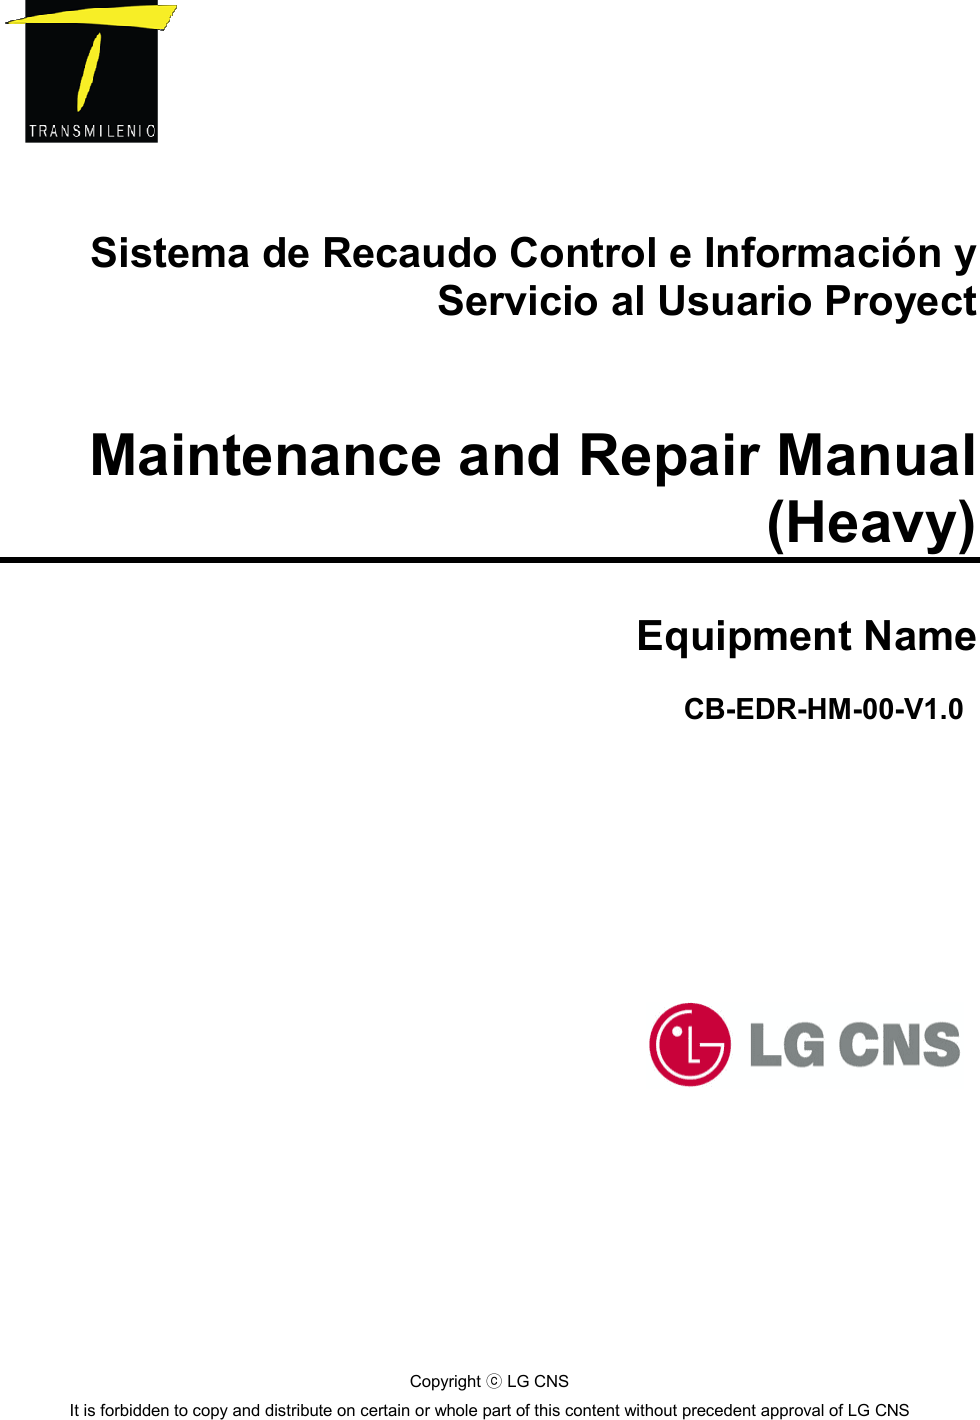       Sistema de Recaudo Control e Información y Servicio al Usuario Proyect   Maintenance and Repair Manual (Heavy)  Equipment Name             CB-EDR-HM-00-V1.0   Copyright   LG CNSⓒ It is forbidden to copy and distribute on certain or whole part of this content without precedent approval of LG CNS  